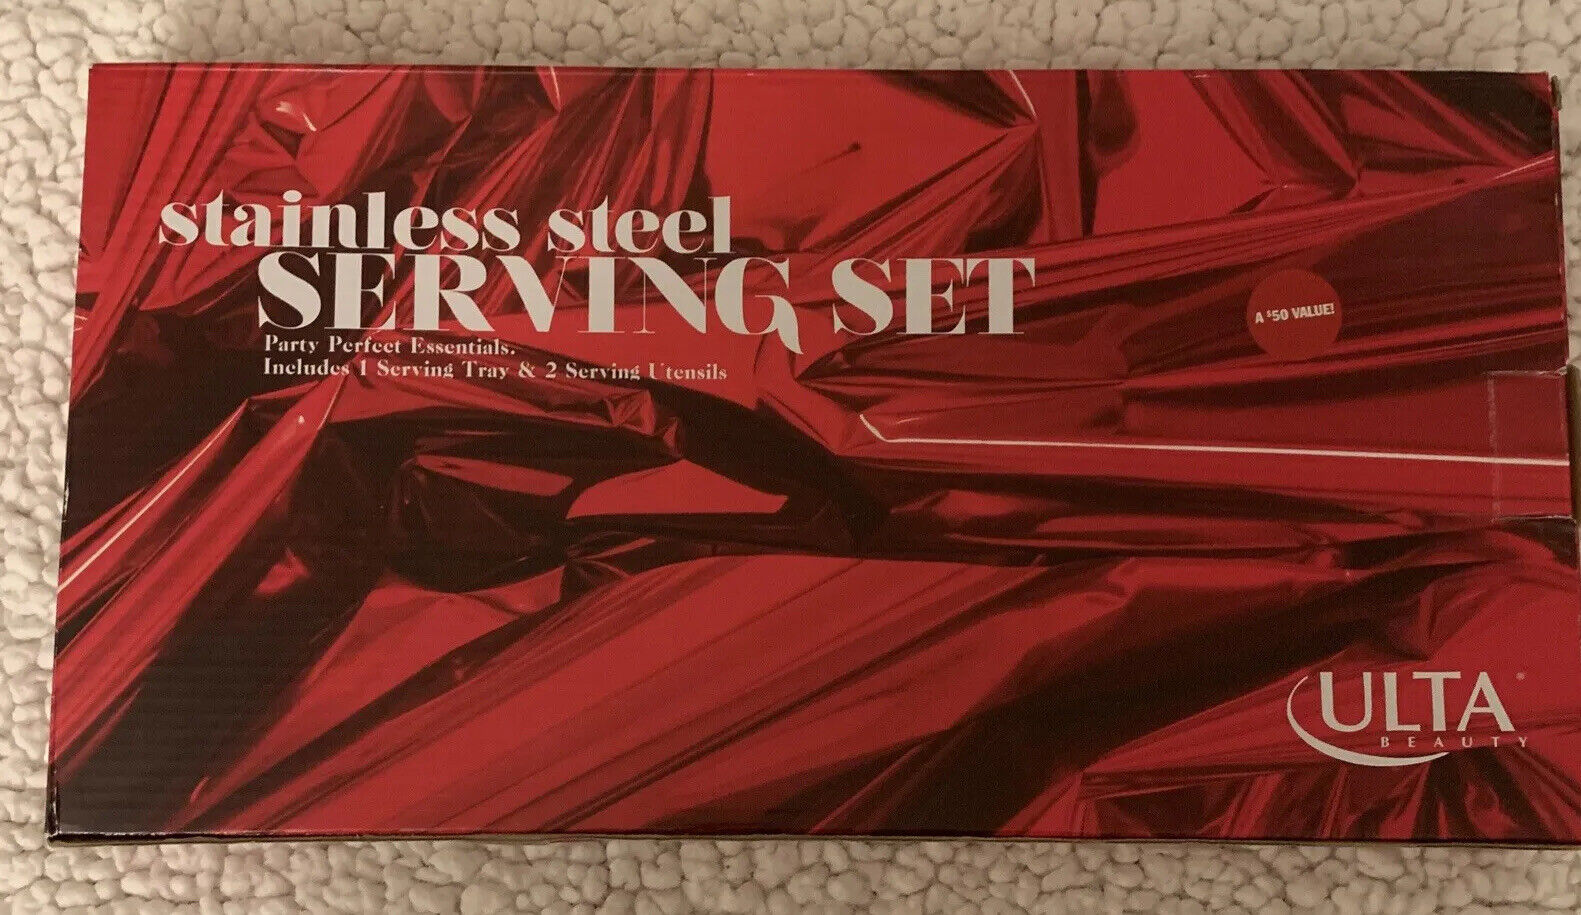 Ulta NIB Three Piece Stainless Steel Serving Tray with Utensils. Party Perfect